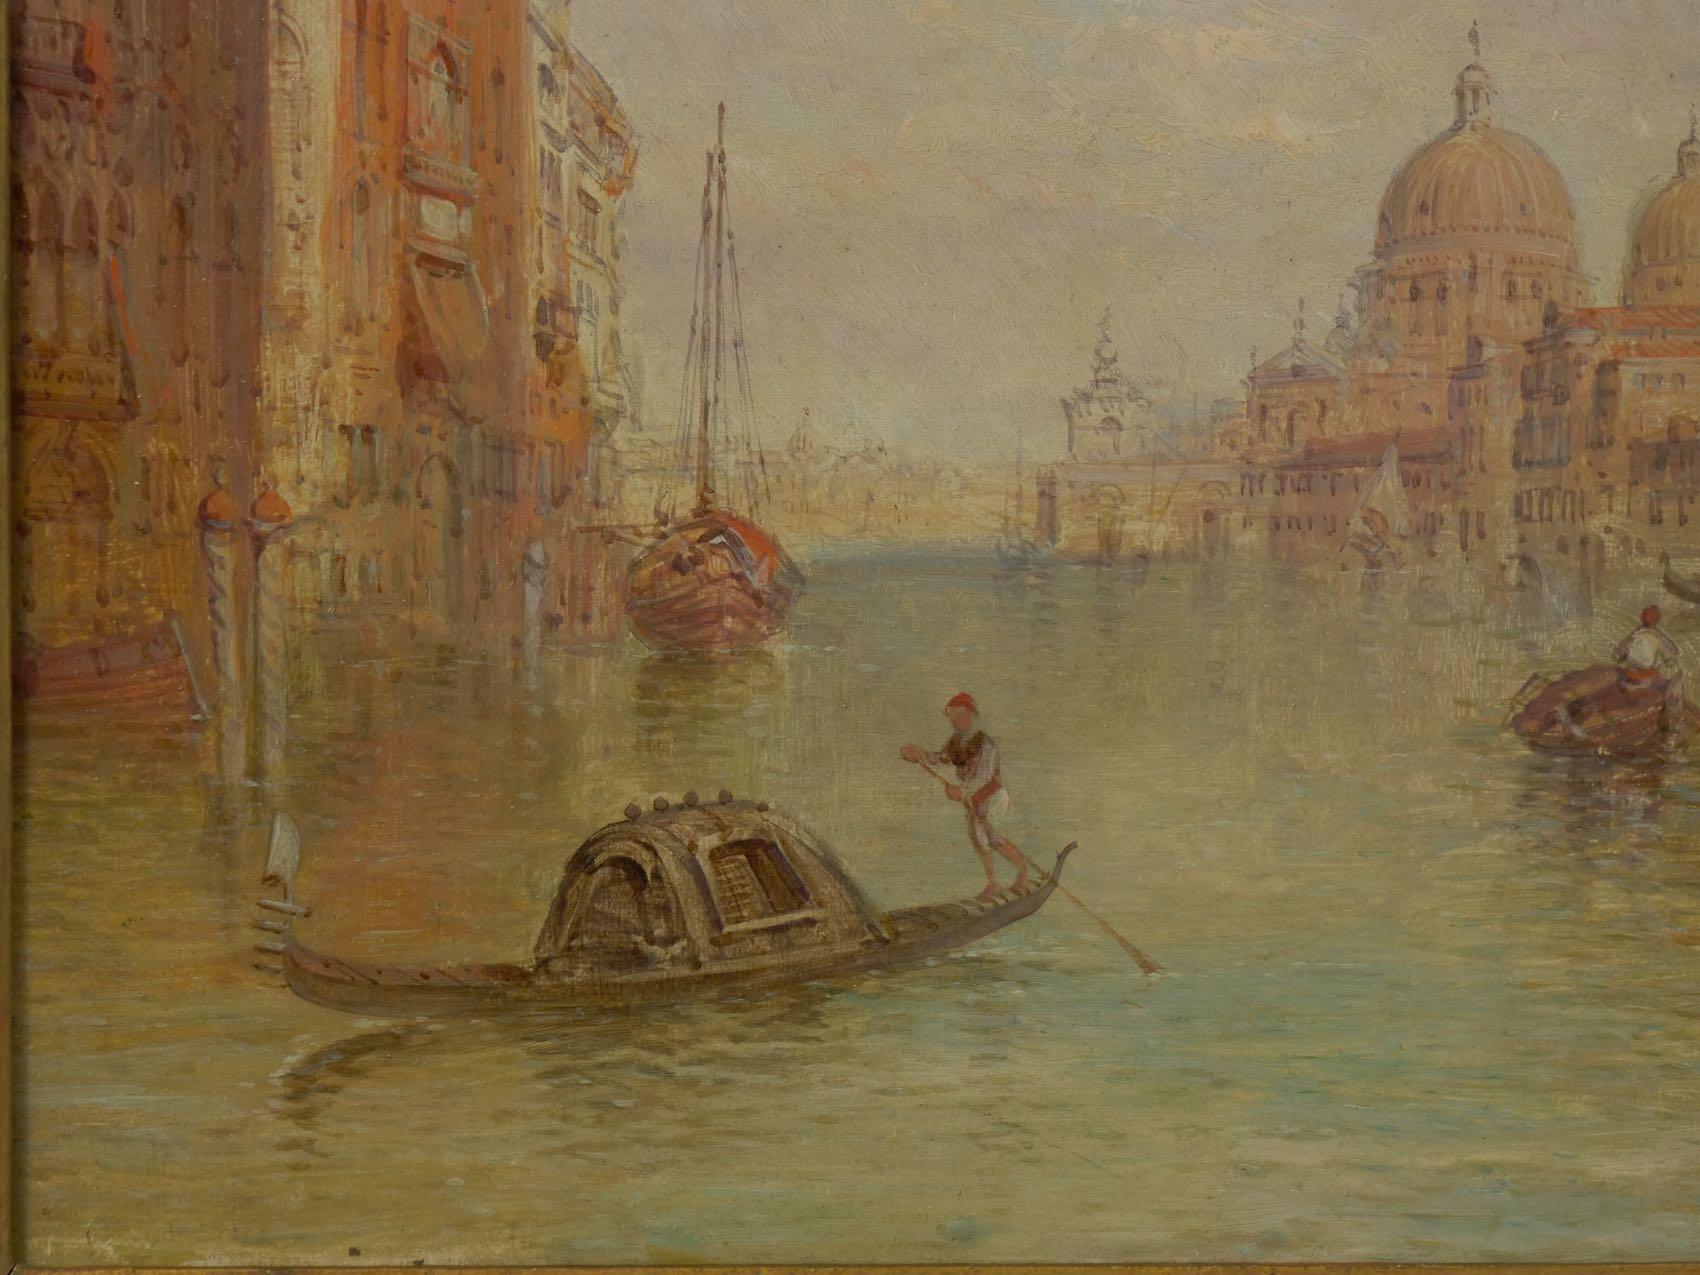 Hand-Painted Antique Oil Painting “Grand Canal, Venice” 1889 by Alfred Pollentine